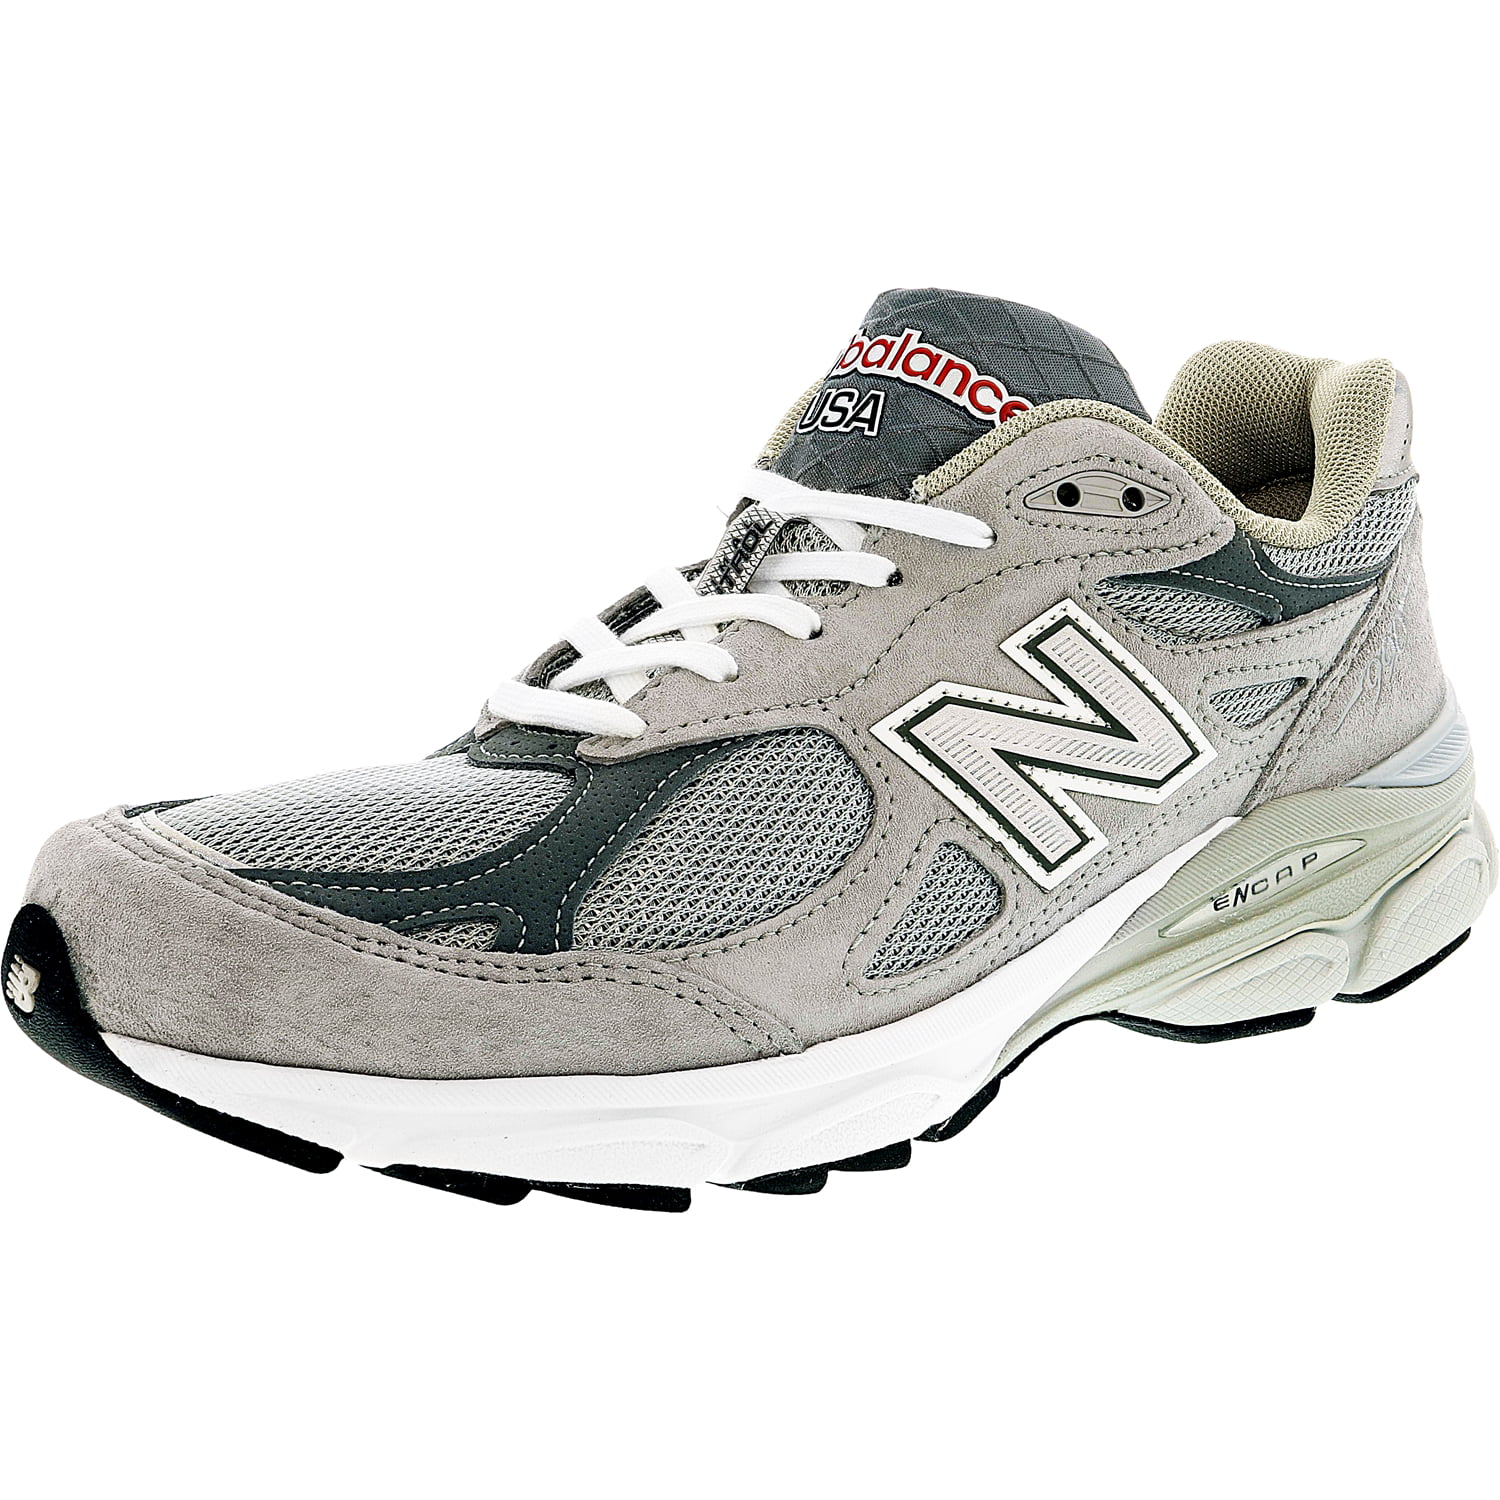 New Balance Men's M990 Gl3 Ankle-High Leather Running Shoe - 8N ...